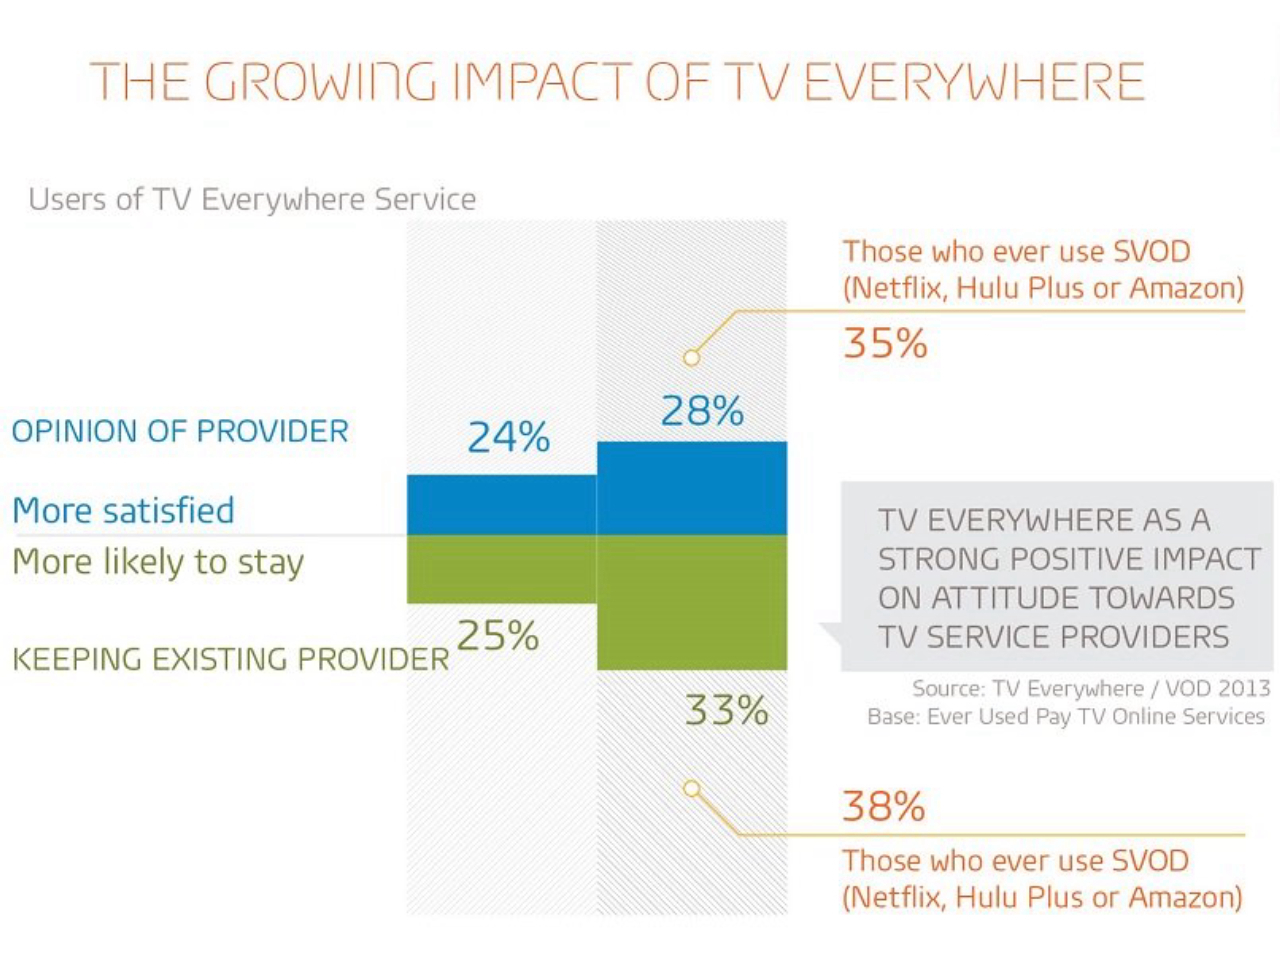 Implications of the Rise of TV Everywhere and Video-on-Demand